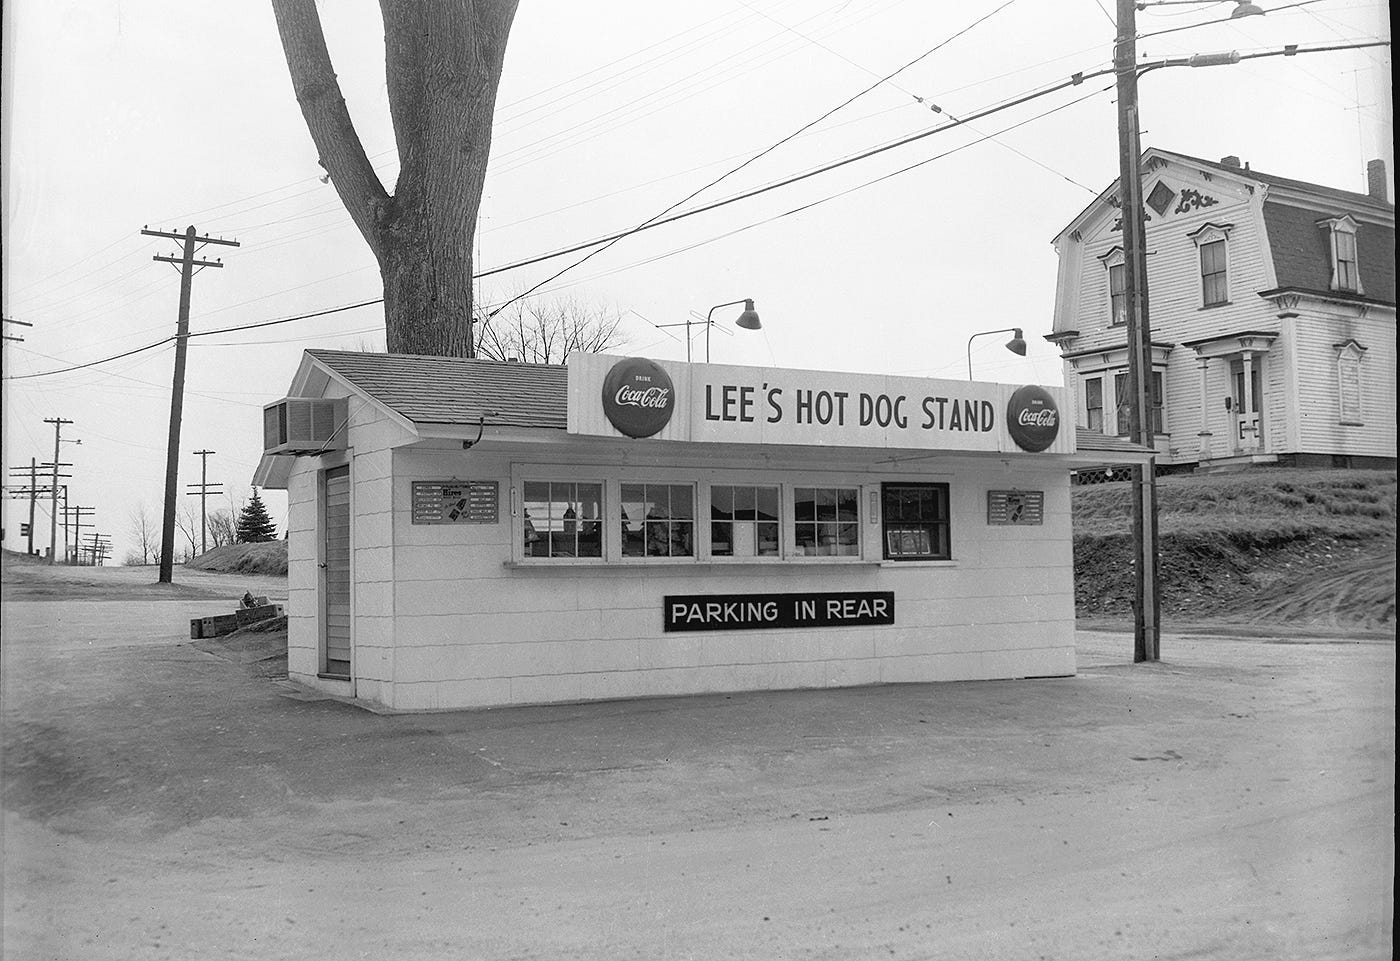 Then and Now: Lee's Hot Dog Stand has served its fans for generations